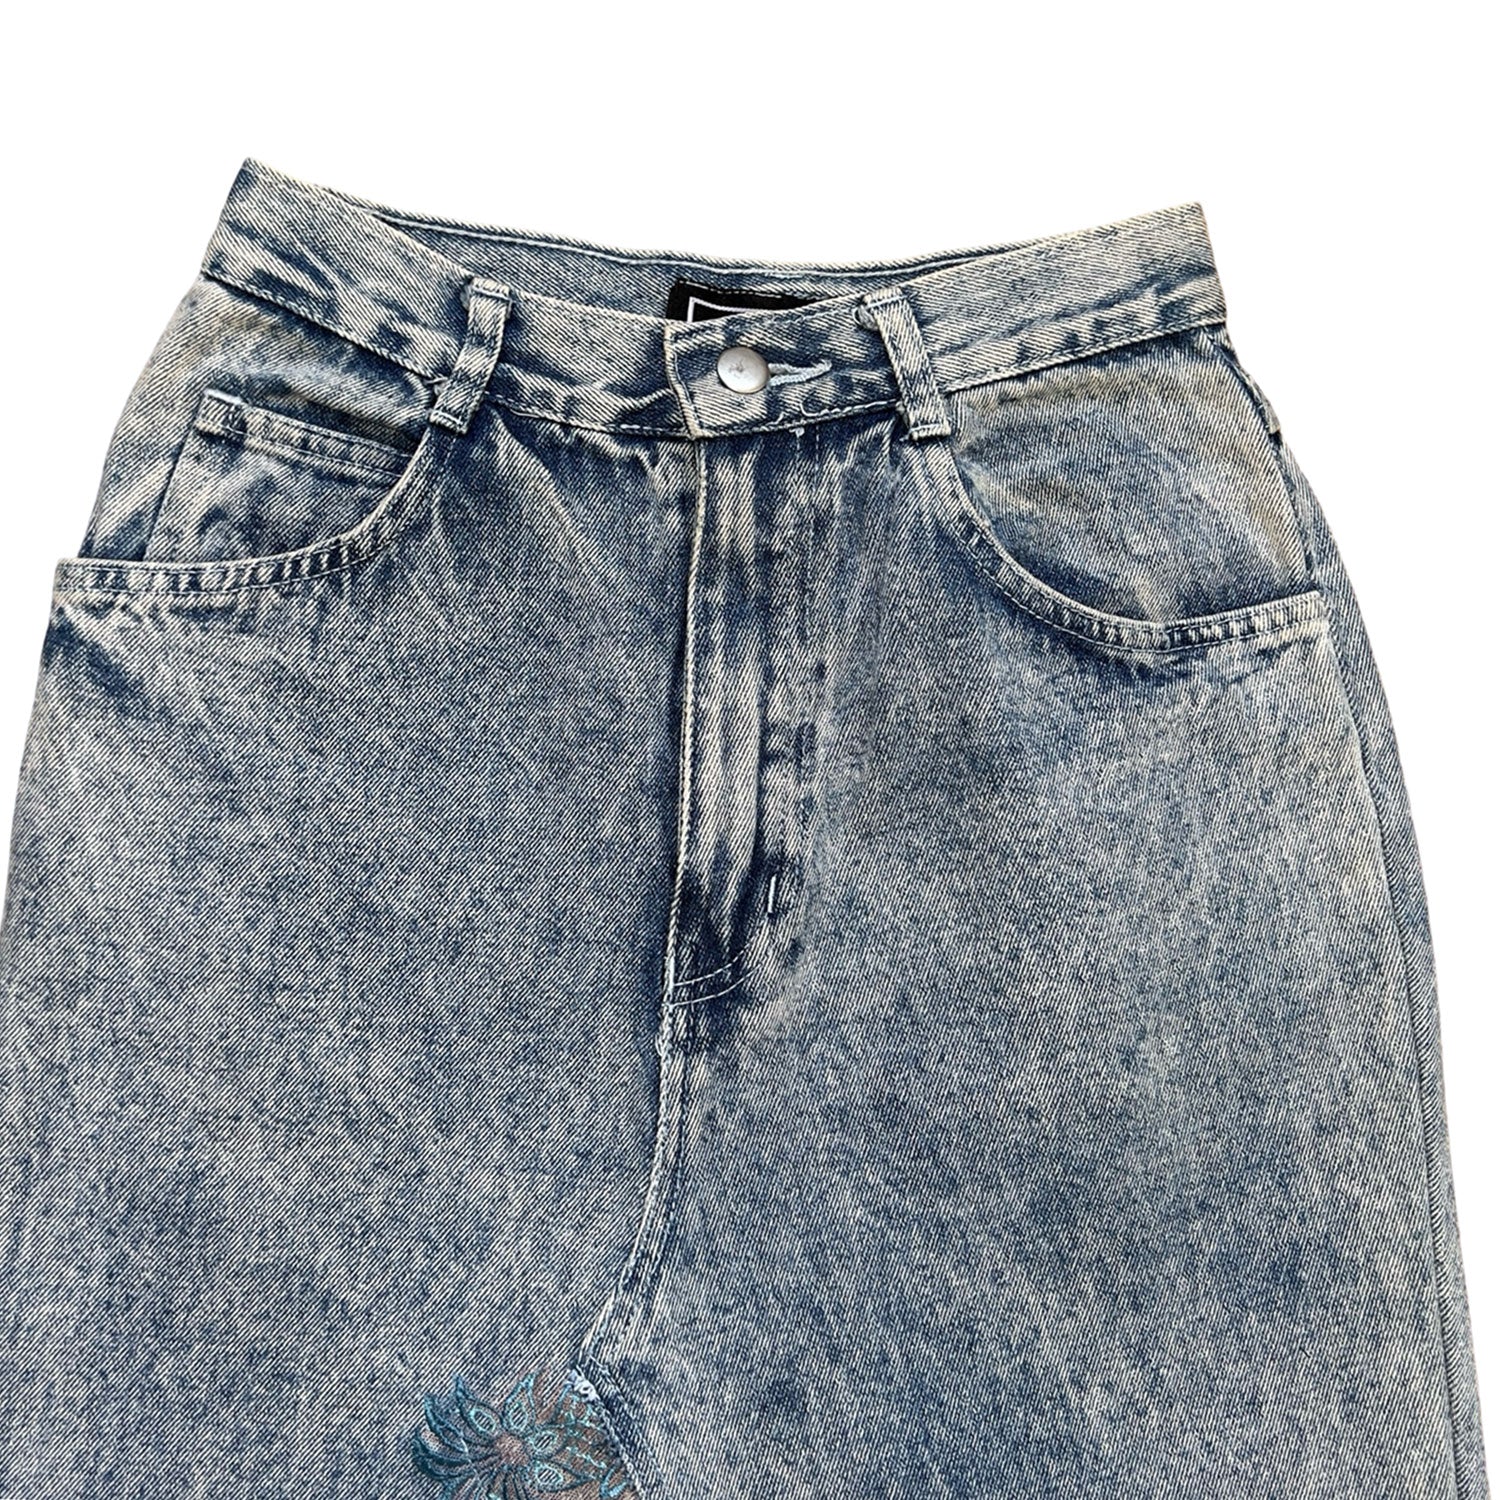 Denim Skirt In Blue With Side Bows